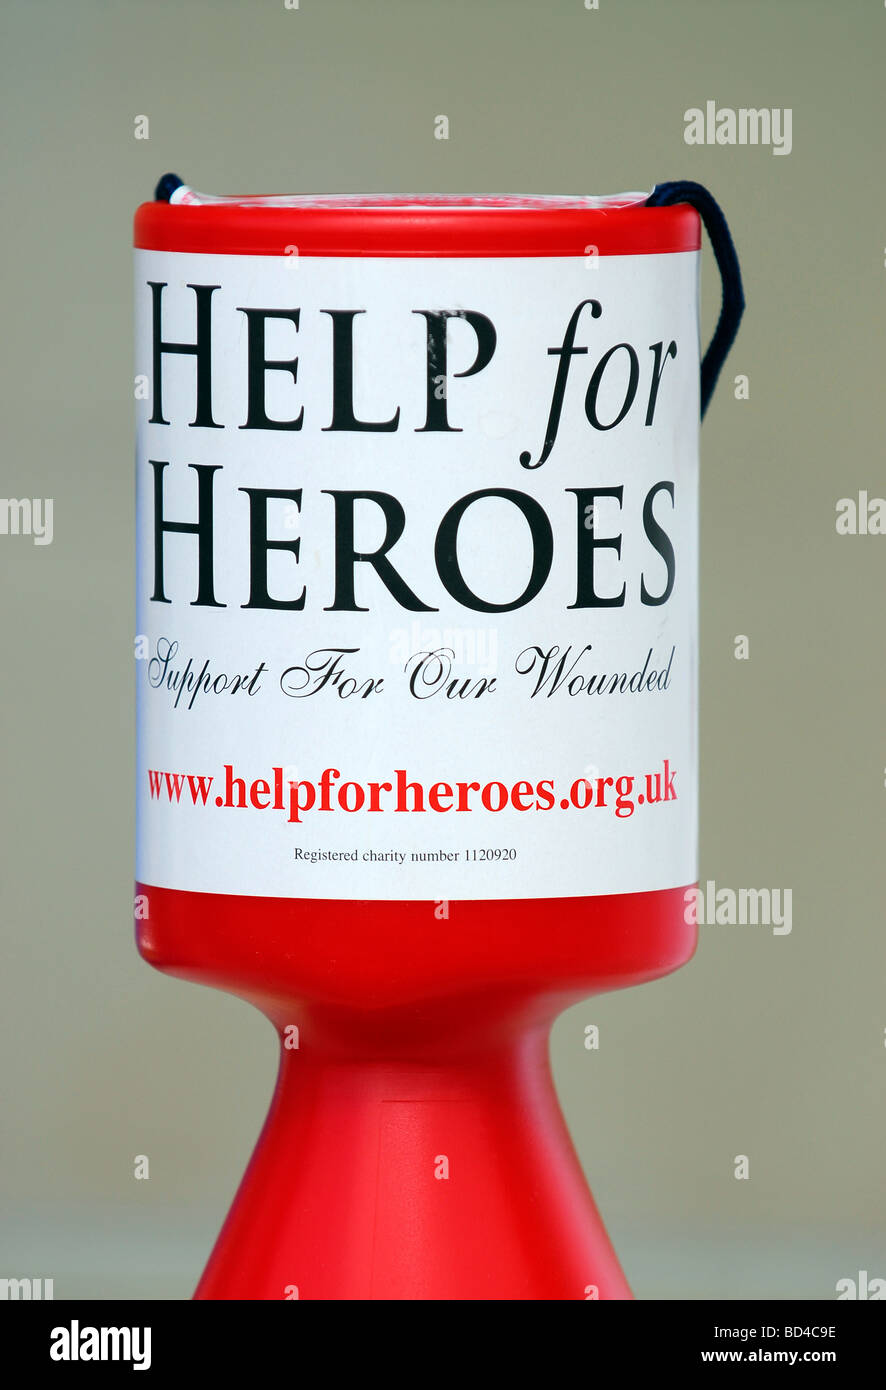 Collection box for the charity Help for Heroes, supporting wounded military personnel, Hampshire, UK. Stock Photo